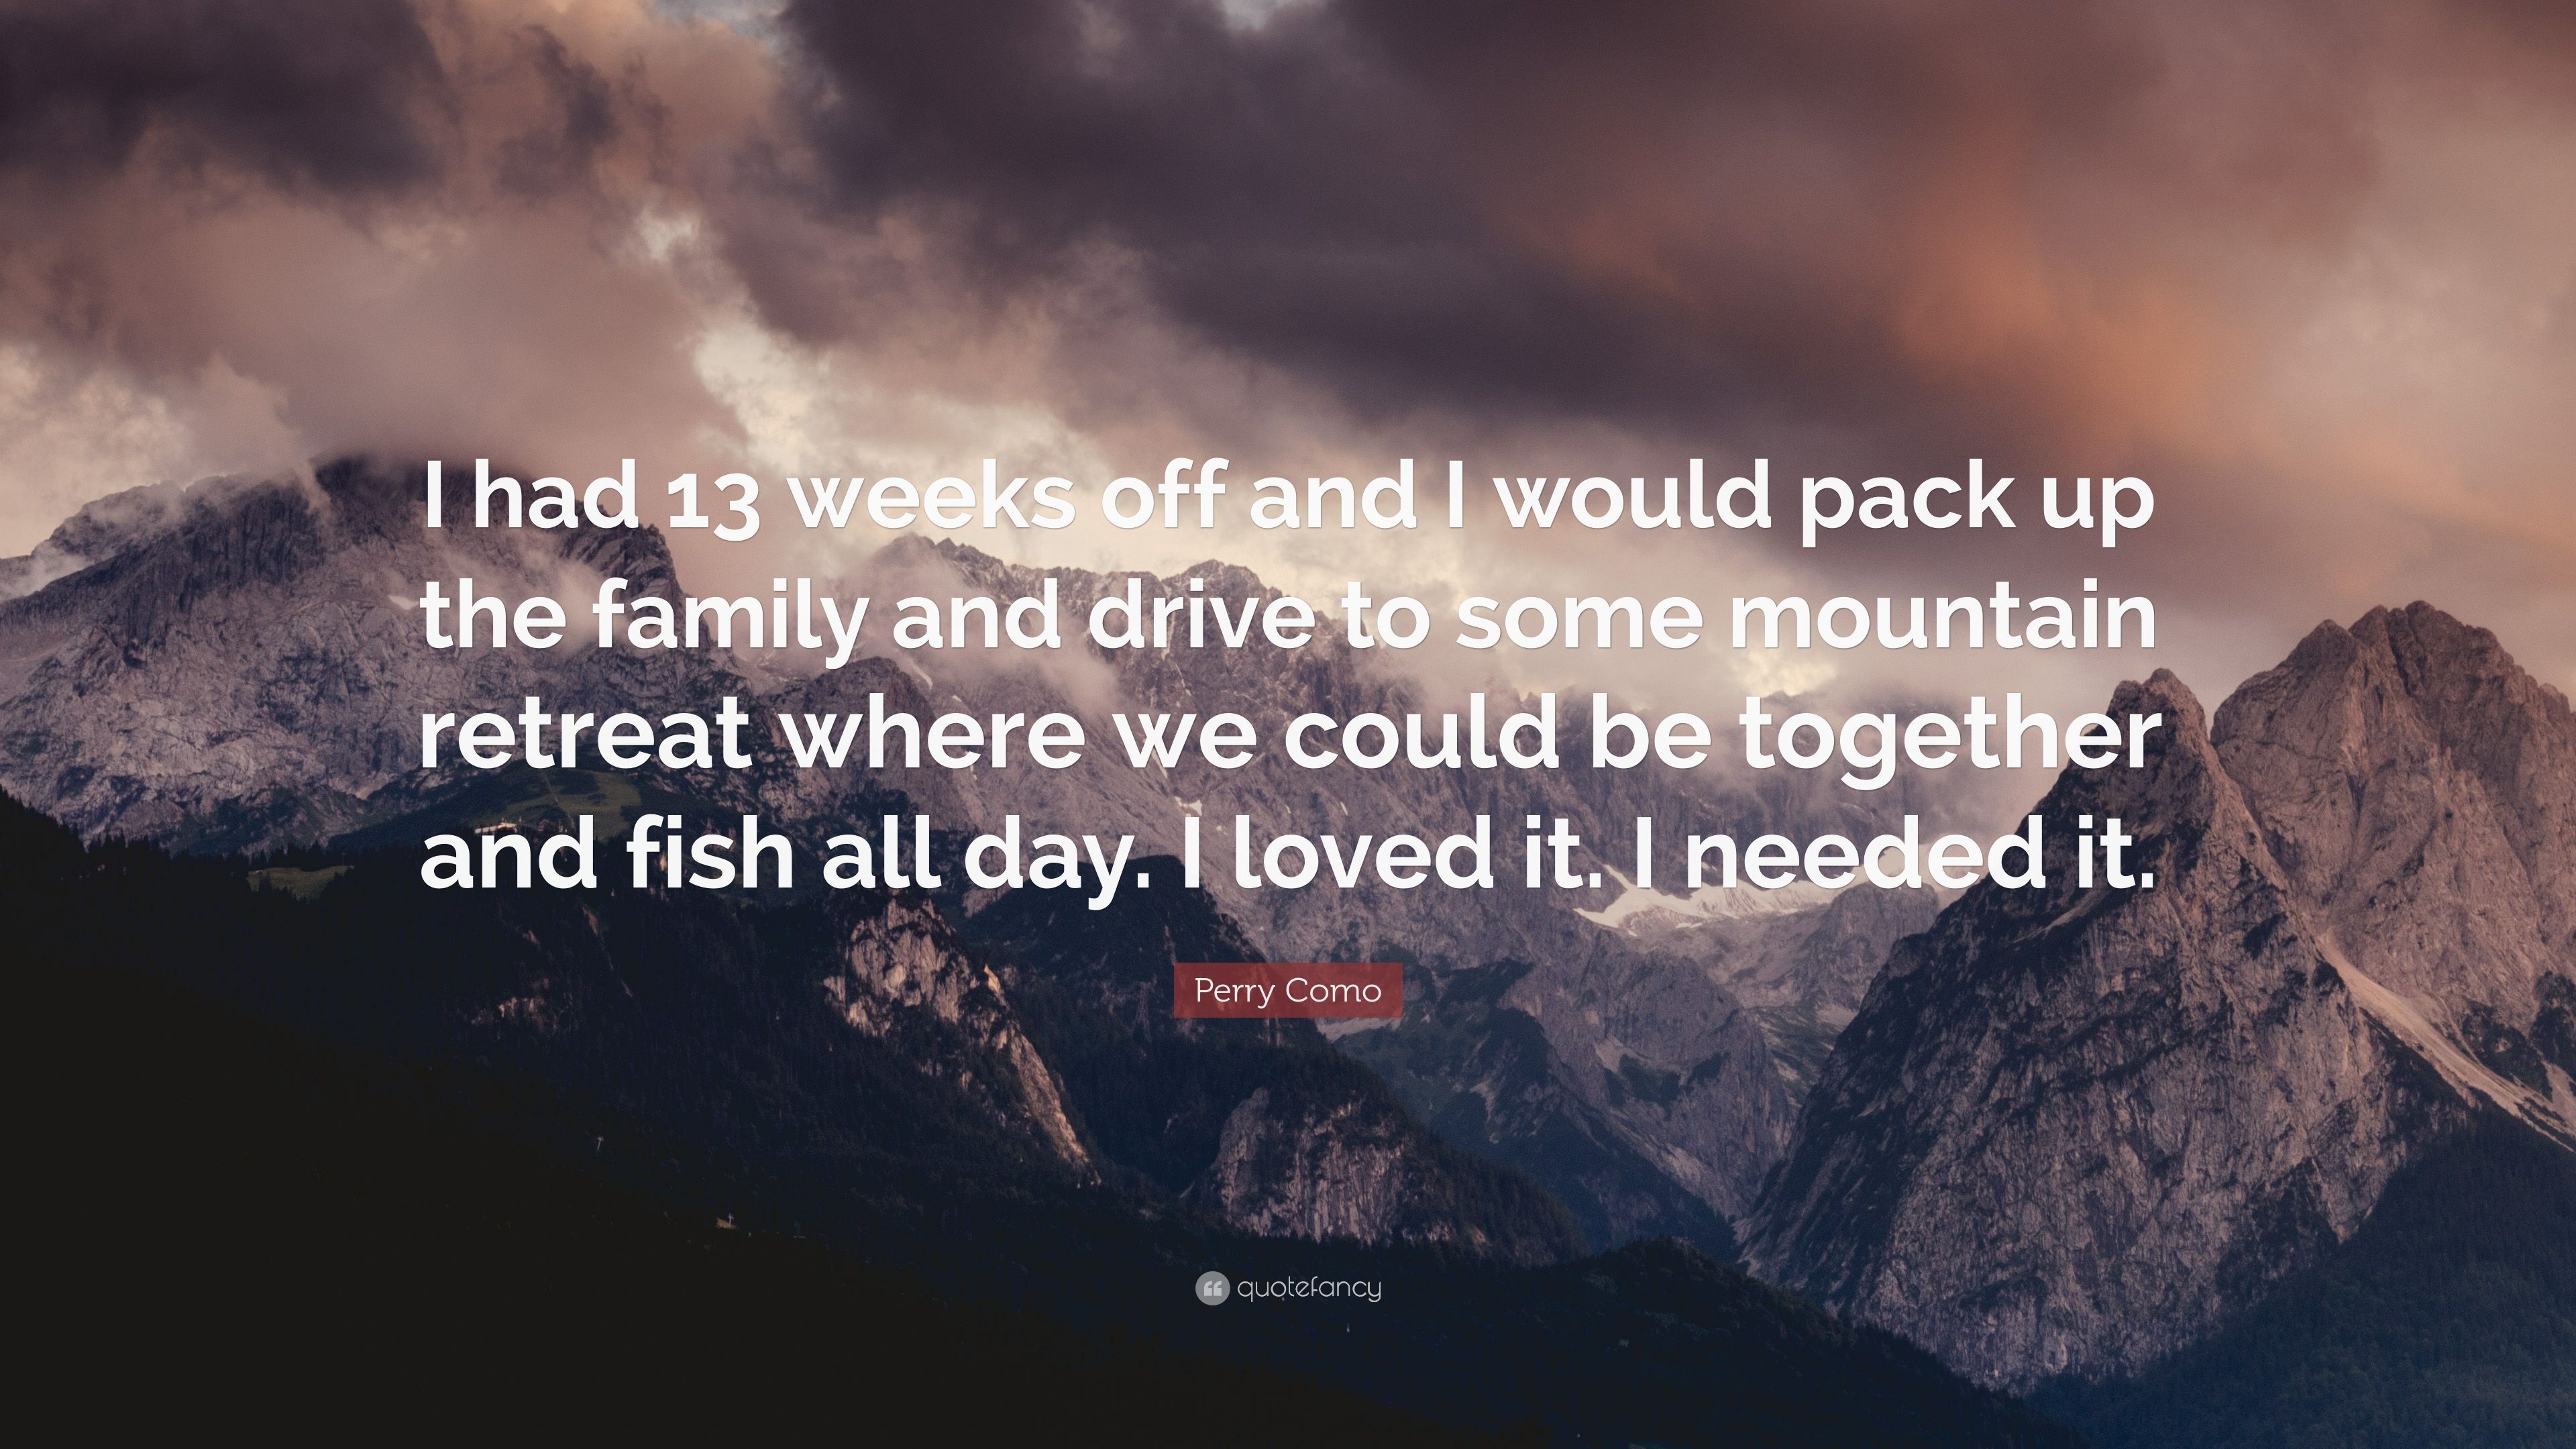 Perry Como Quote: “I had 13 weeks off and I would pack up